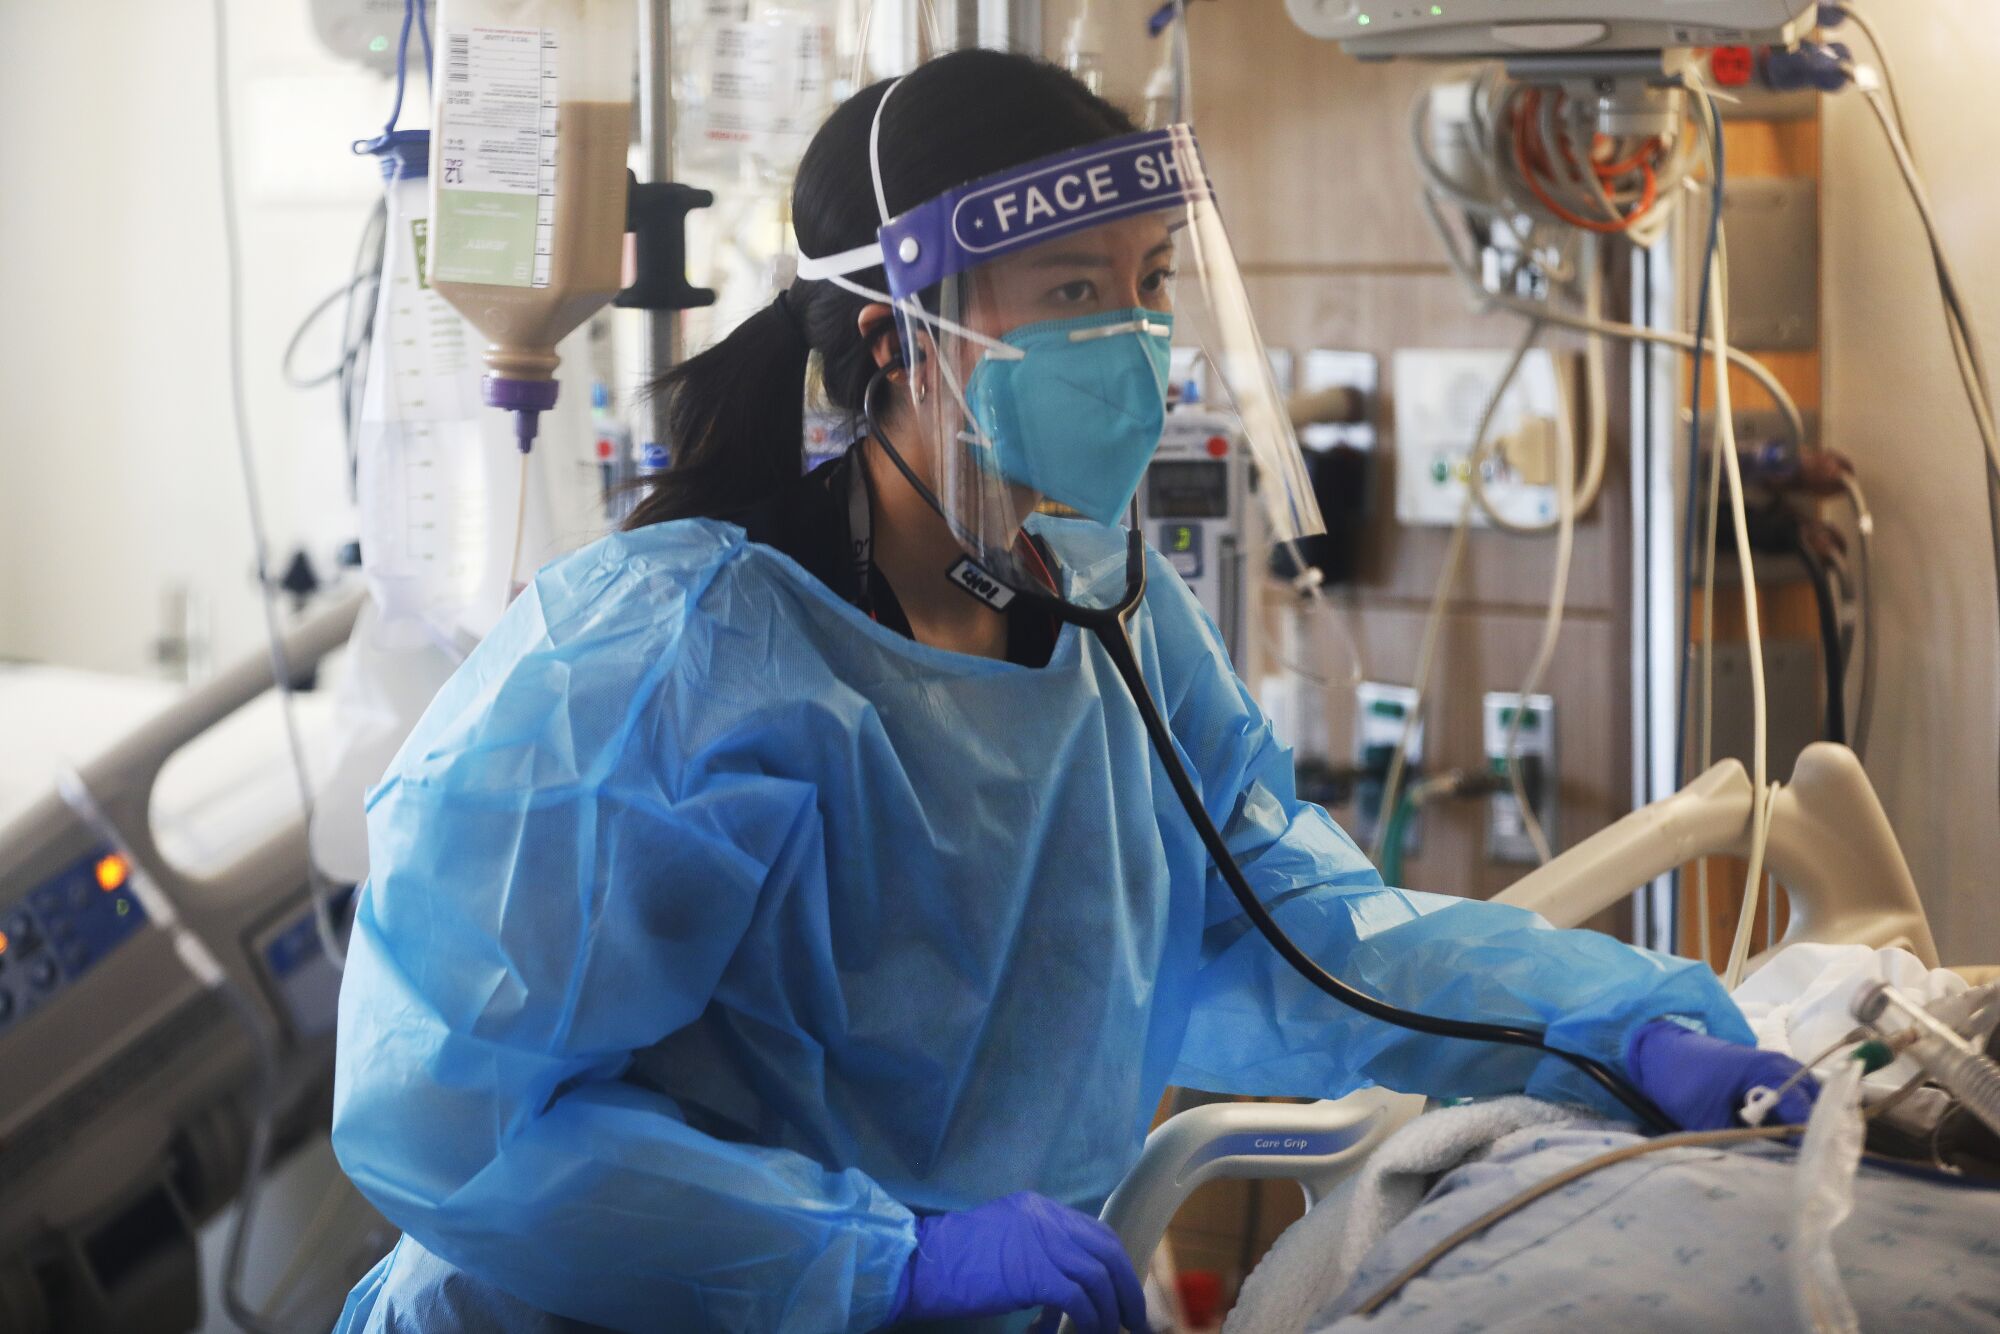 Dr. Christine Choi treating a patient